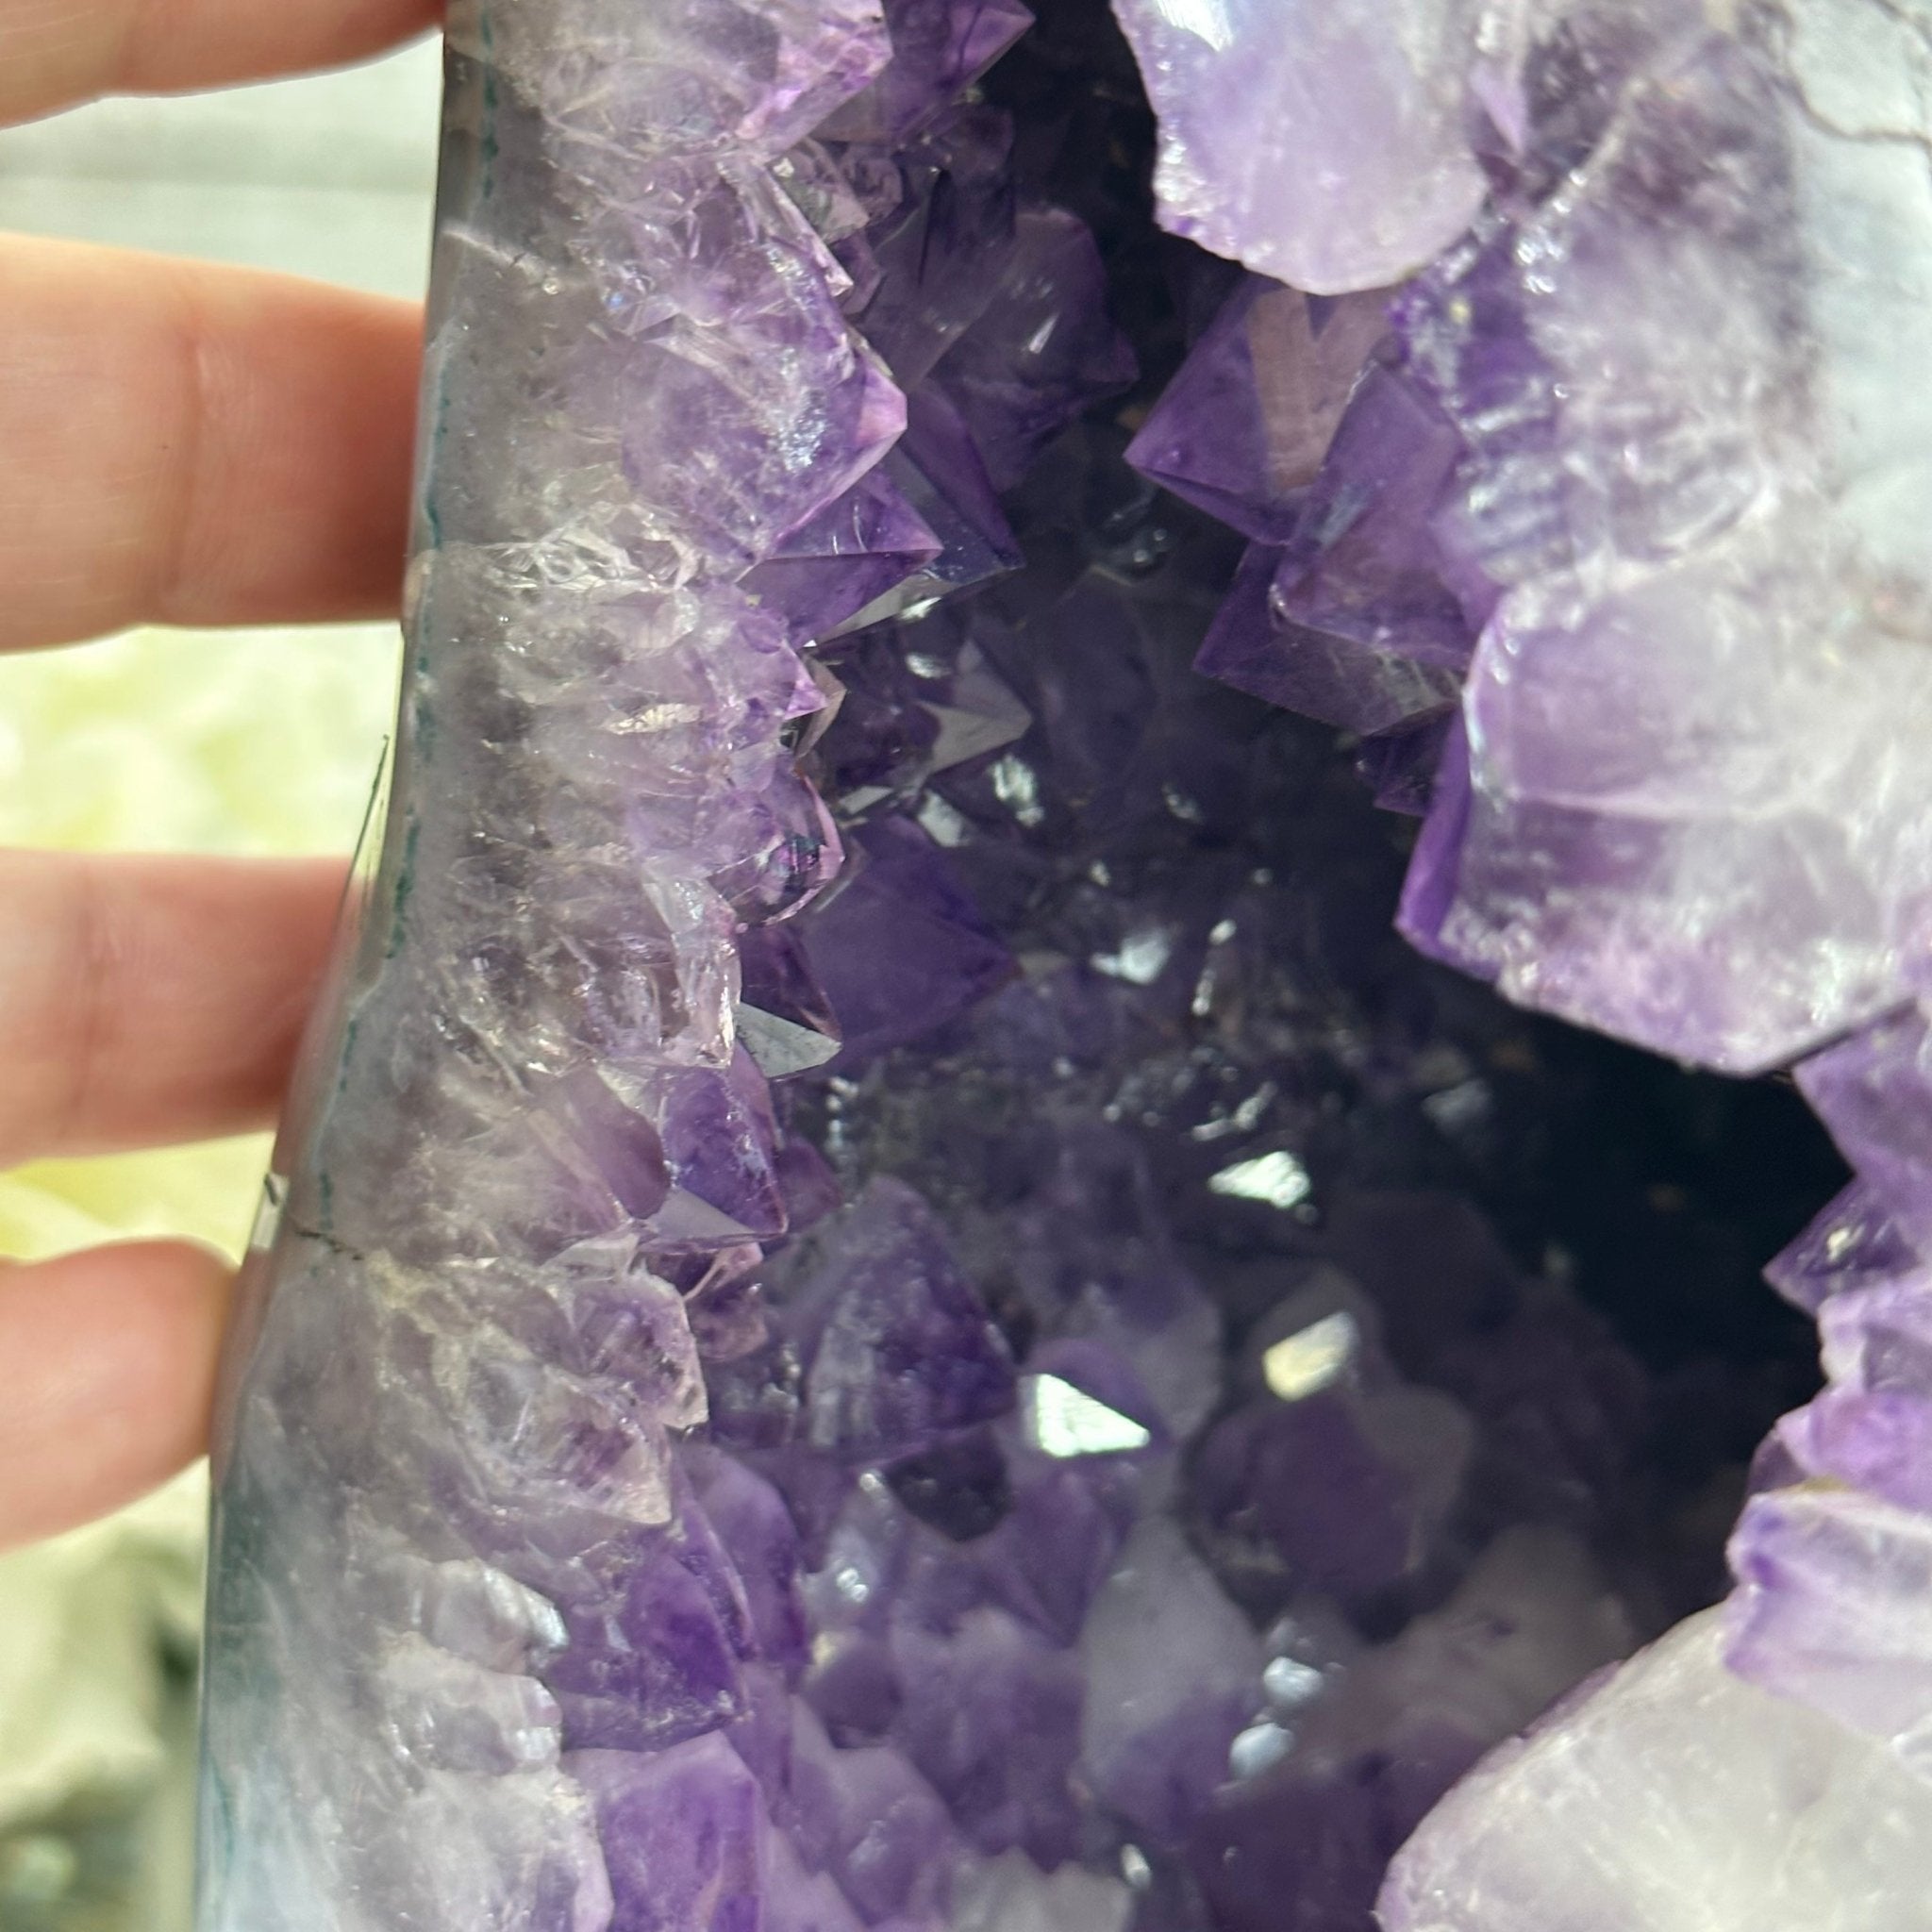 Super Quality Brazilian Amethyst Cathedral, 13.6 lbs & 9.6" Tall, Model #5601-0963 by Brazil Gems - Brazil GemsBrazil GemsSuper Quality Brazilian Amethyst Cathedral, 13.6 lbs & 9.6" Tall, Model #5601-0963 by Brazil GemsCathedrals5601-0963